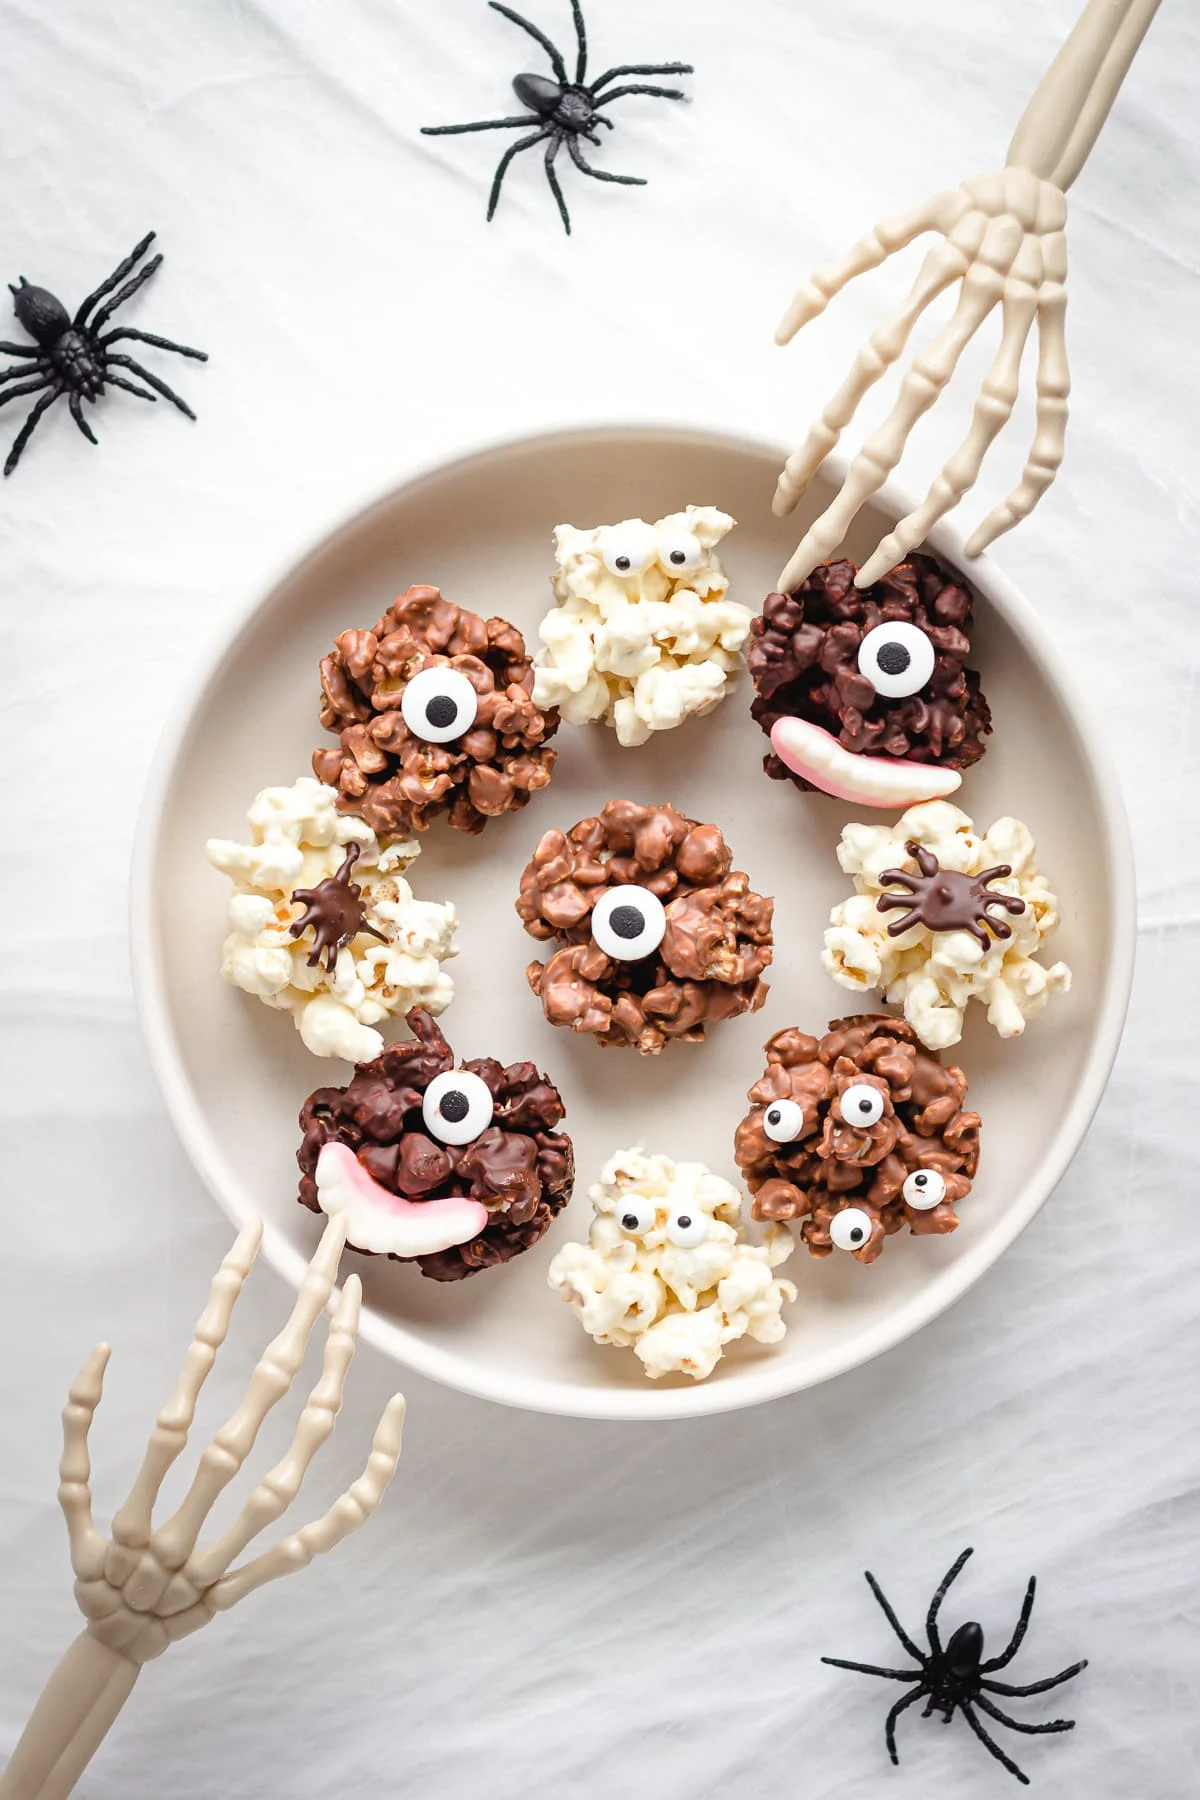 Halloween Popcorn Balls decorated with candy eyes and creepy teeth on a white plate with two skeleton hands reaching for them.